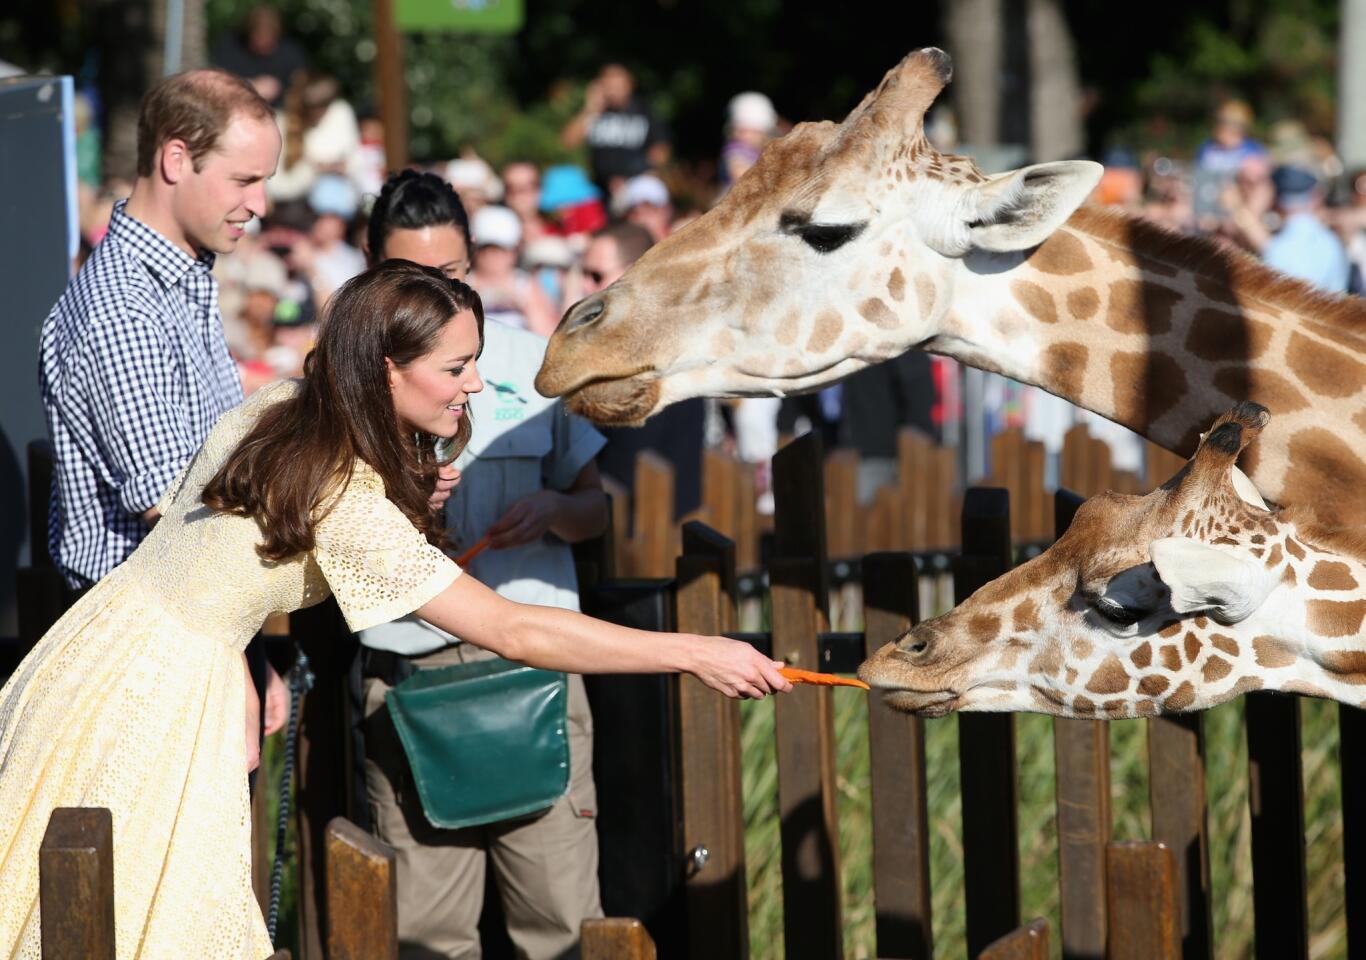 William and Kate feed the giraffes